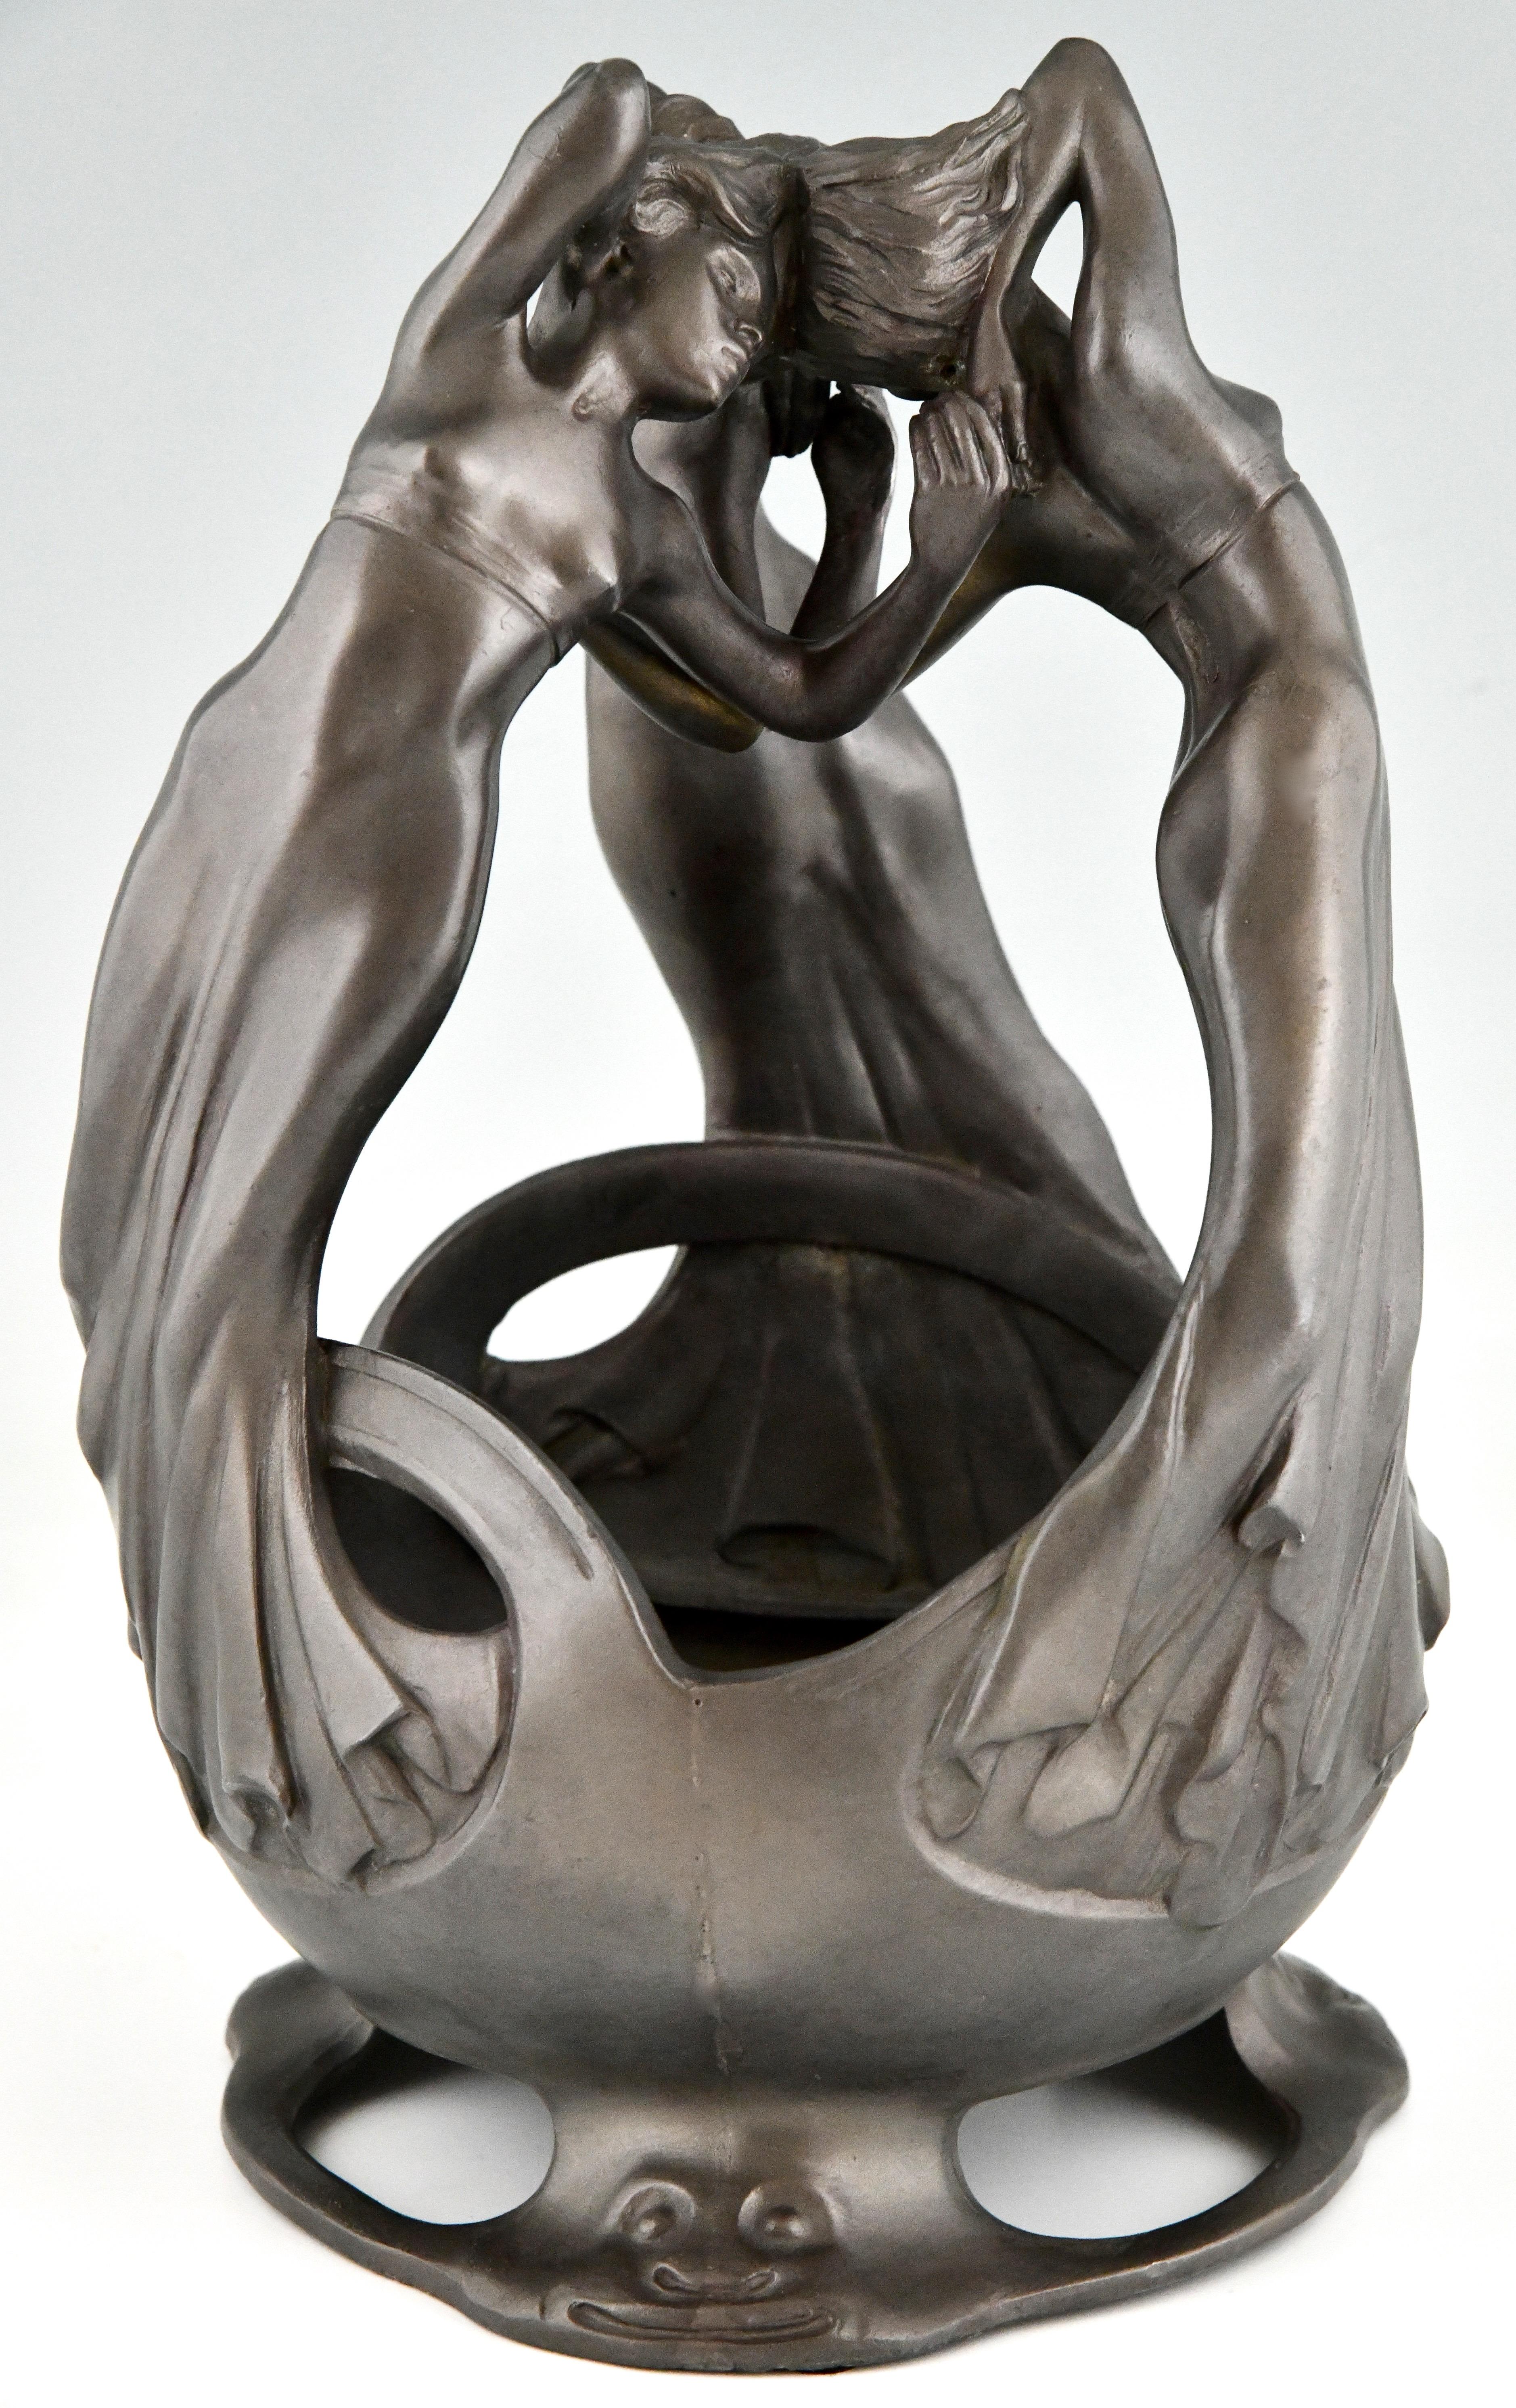 Art Nouveau centerpiece with 3 dancing ladies in pewter by Maurice Maignan.
France ca. 1900.